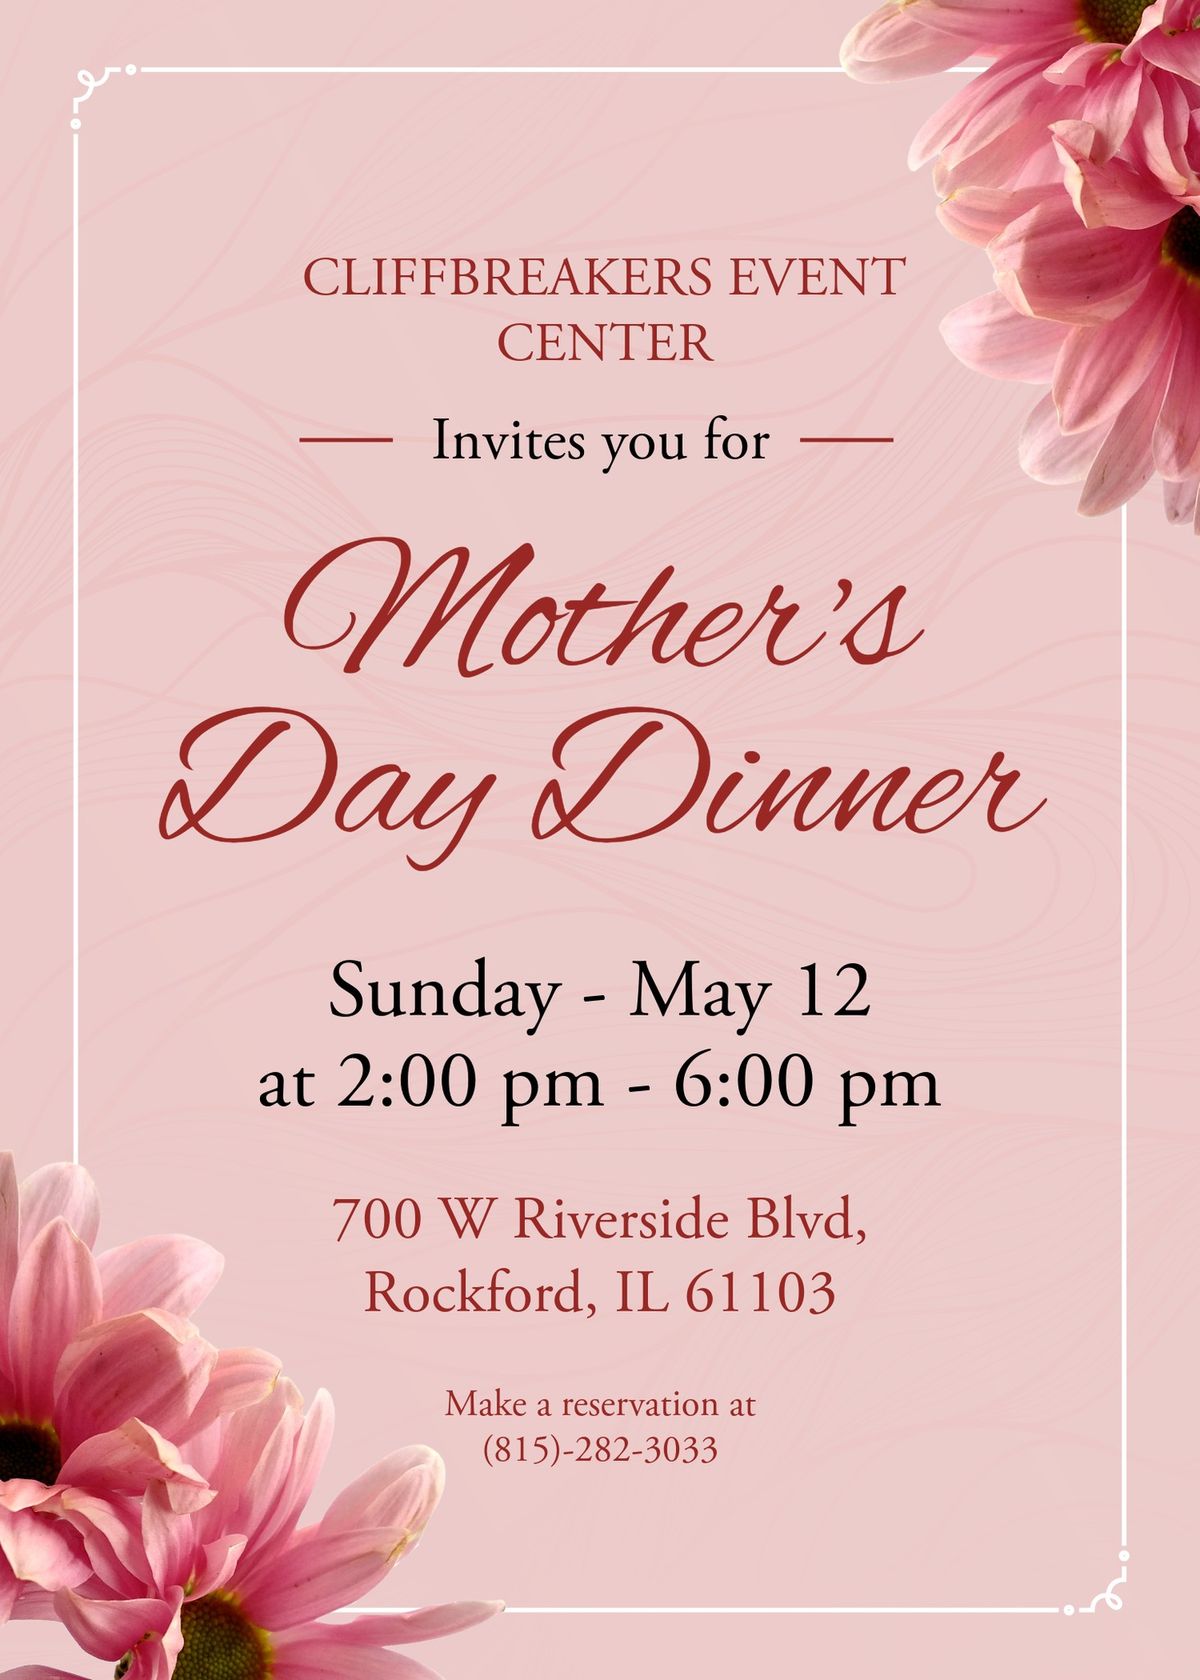 Celebrate Mother's Day at Cliffbreakers Event Center